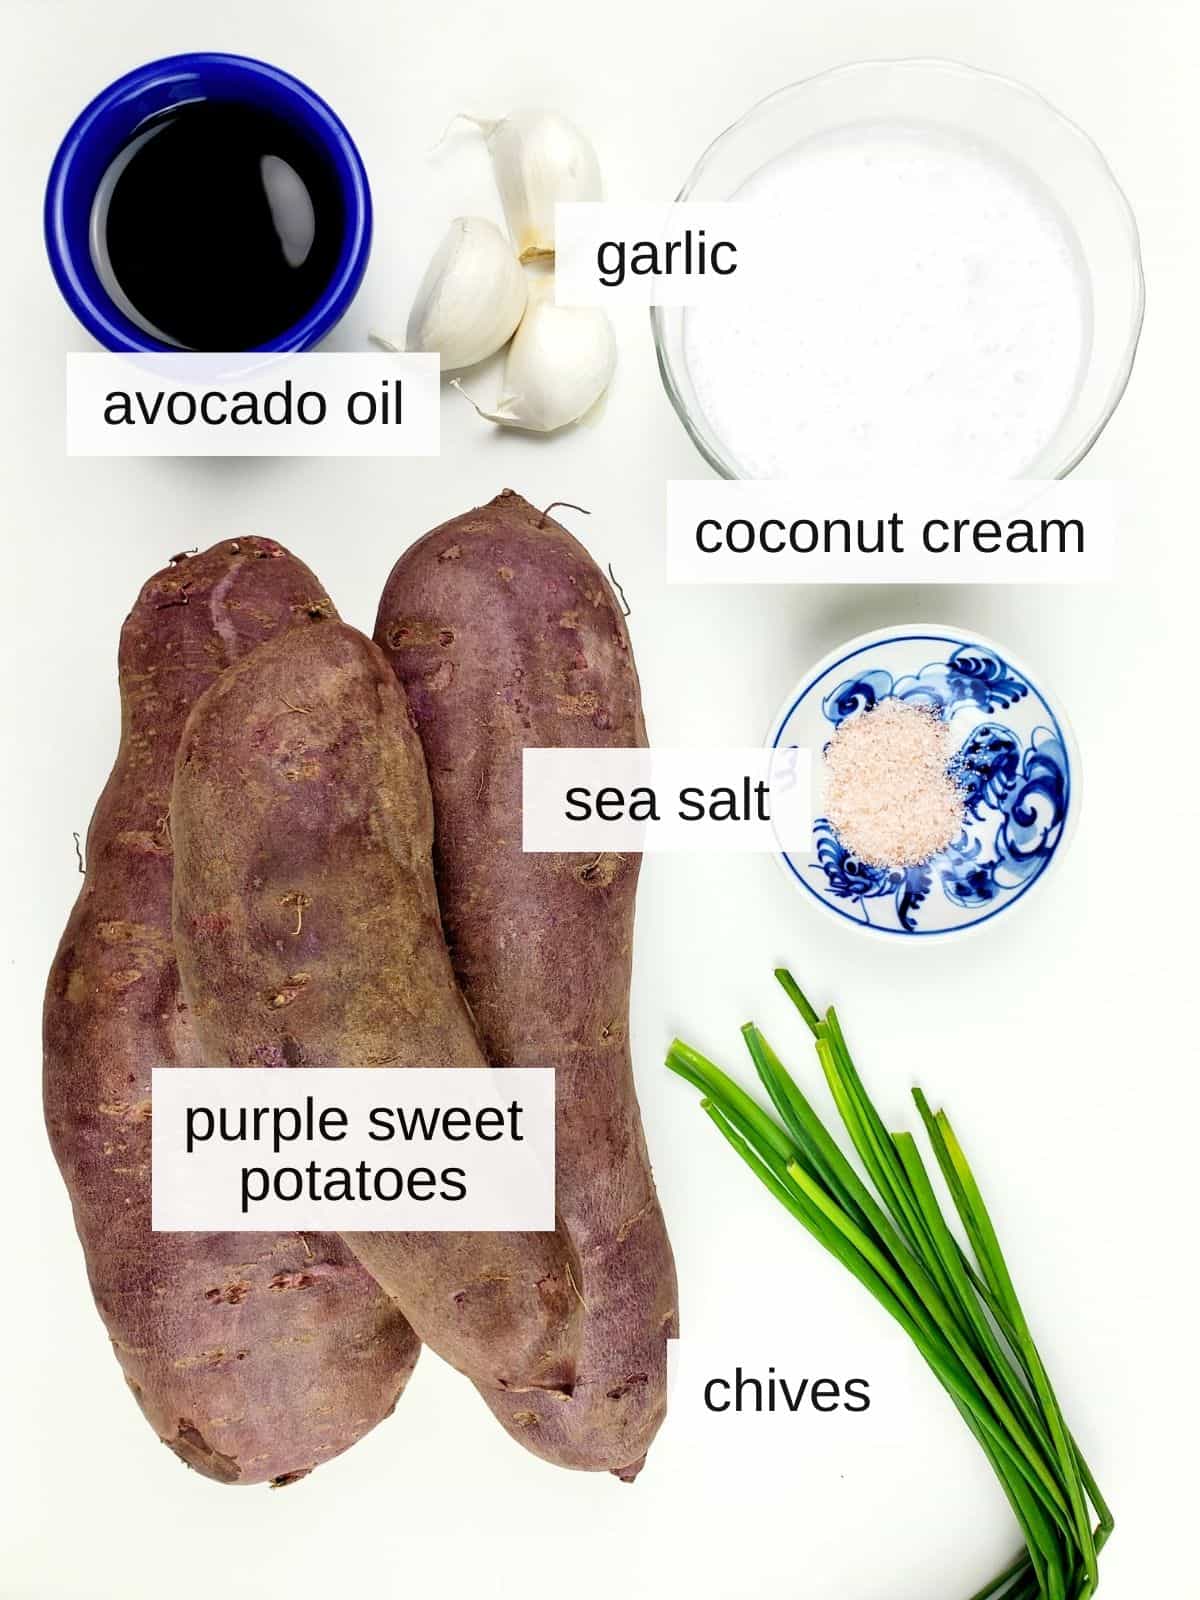 ingredients for mashed purple sweet potatoes, including avocado oil, garlic, coconut cream, sea salt, chives, and purple sweet potatoes.